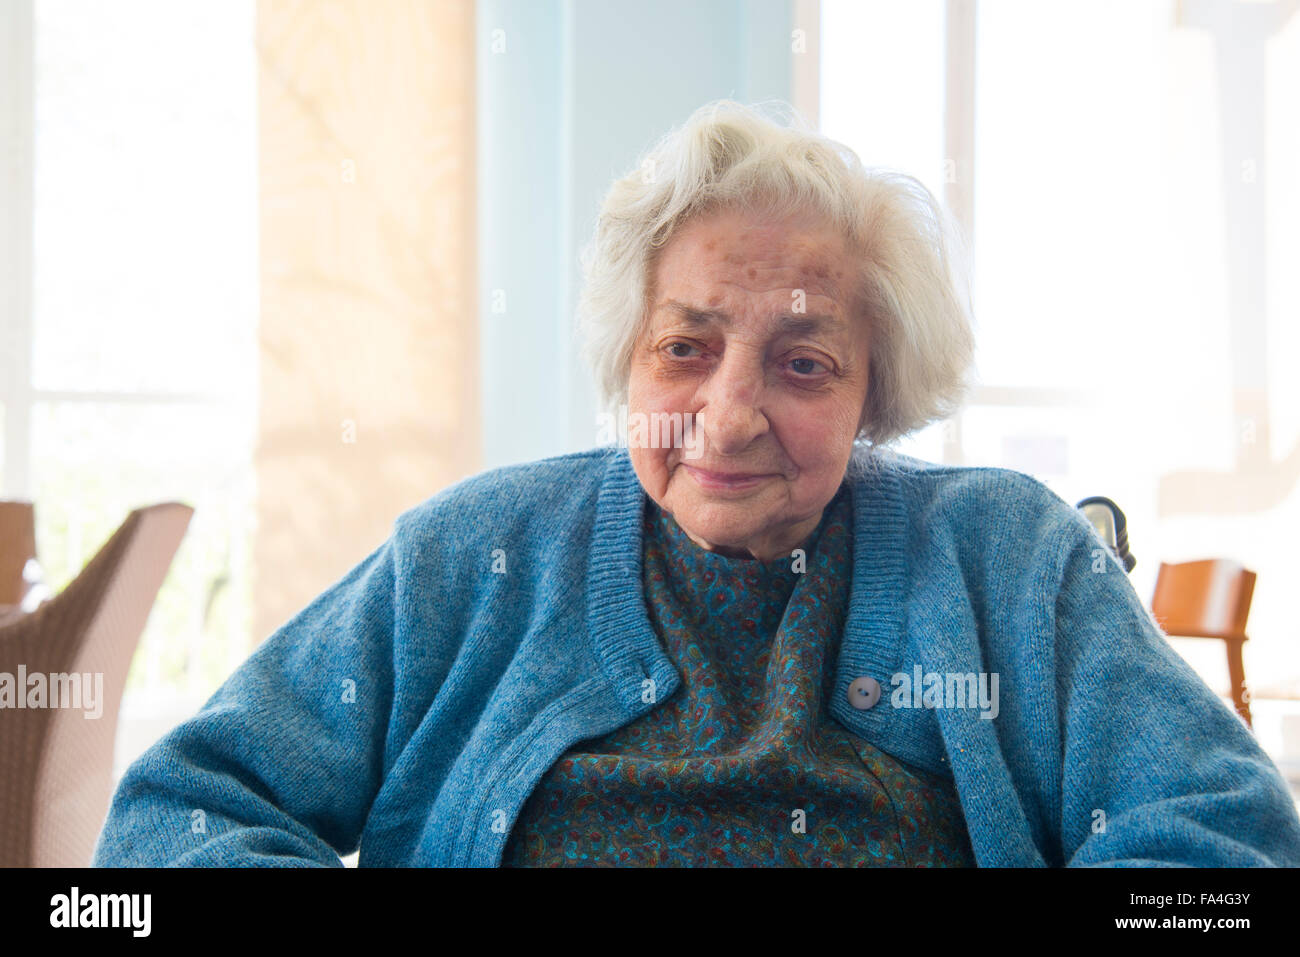 Portrait of old woman in a nursing home. Stock Photo